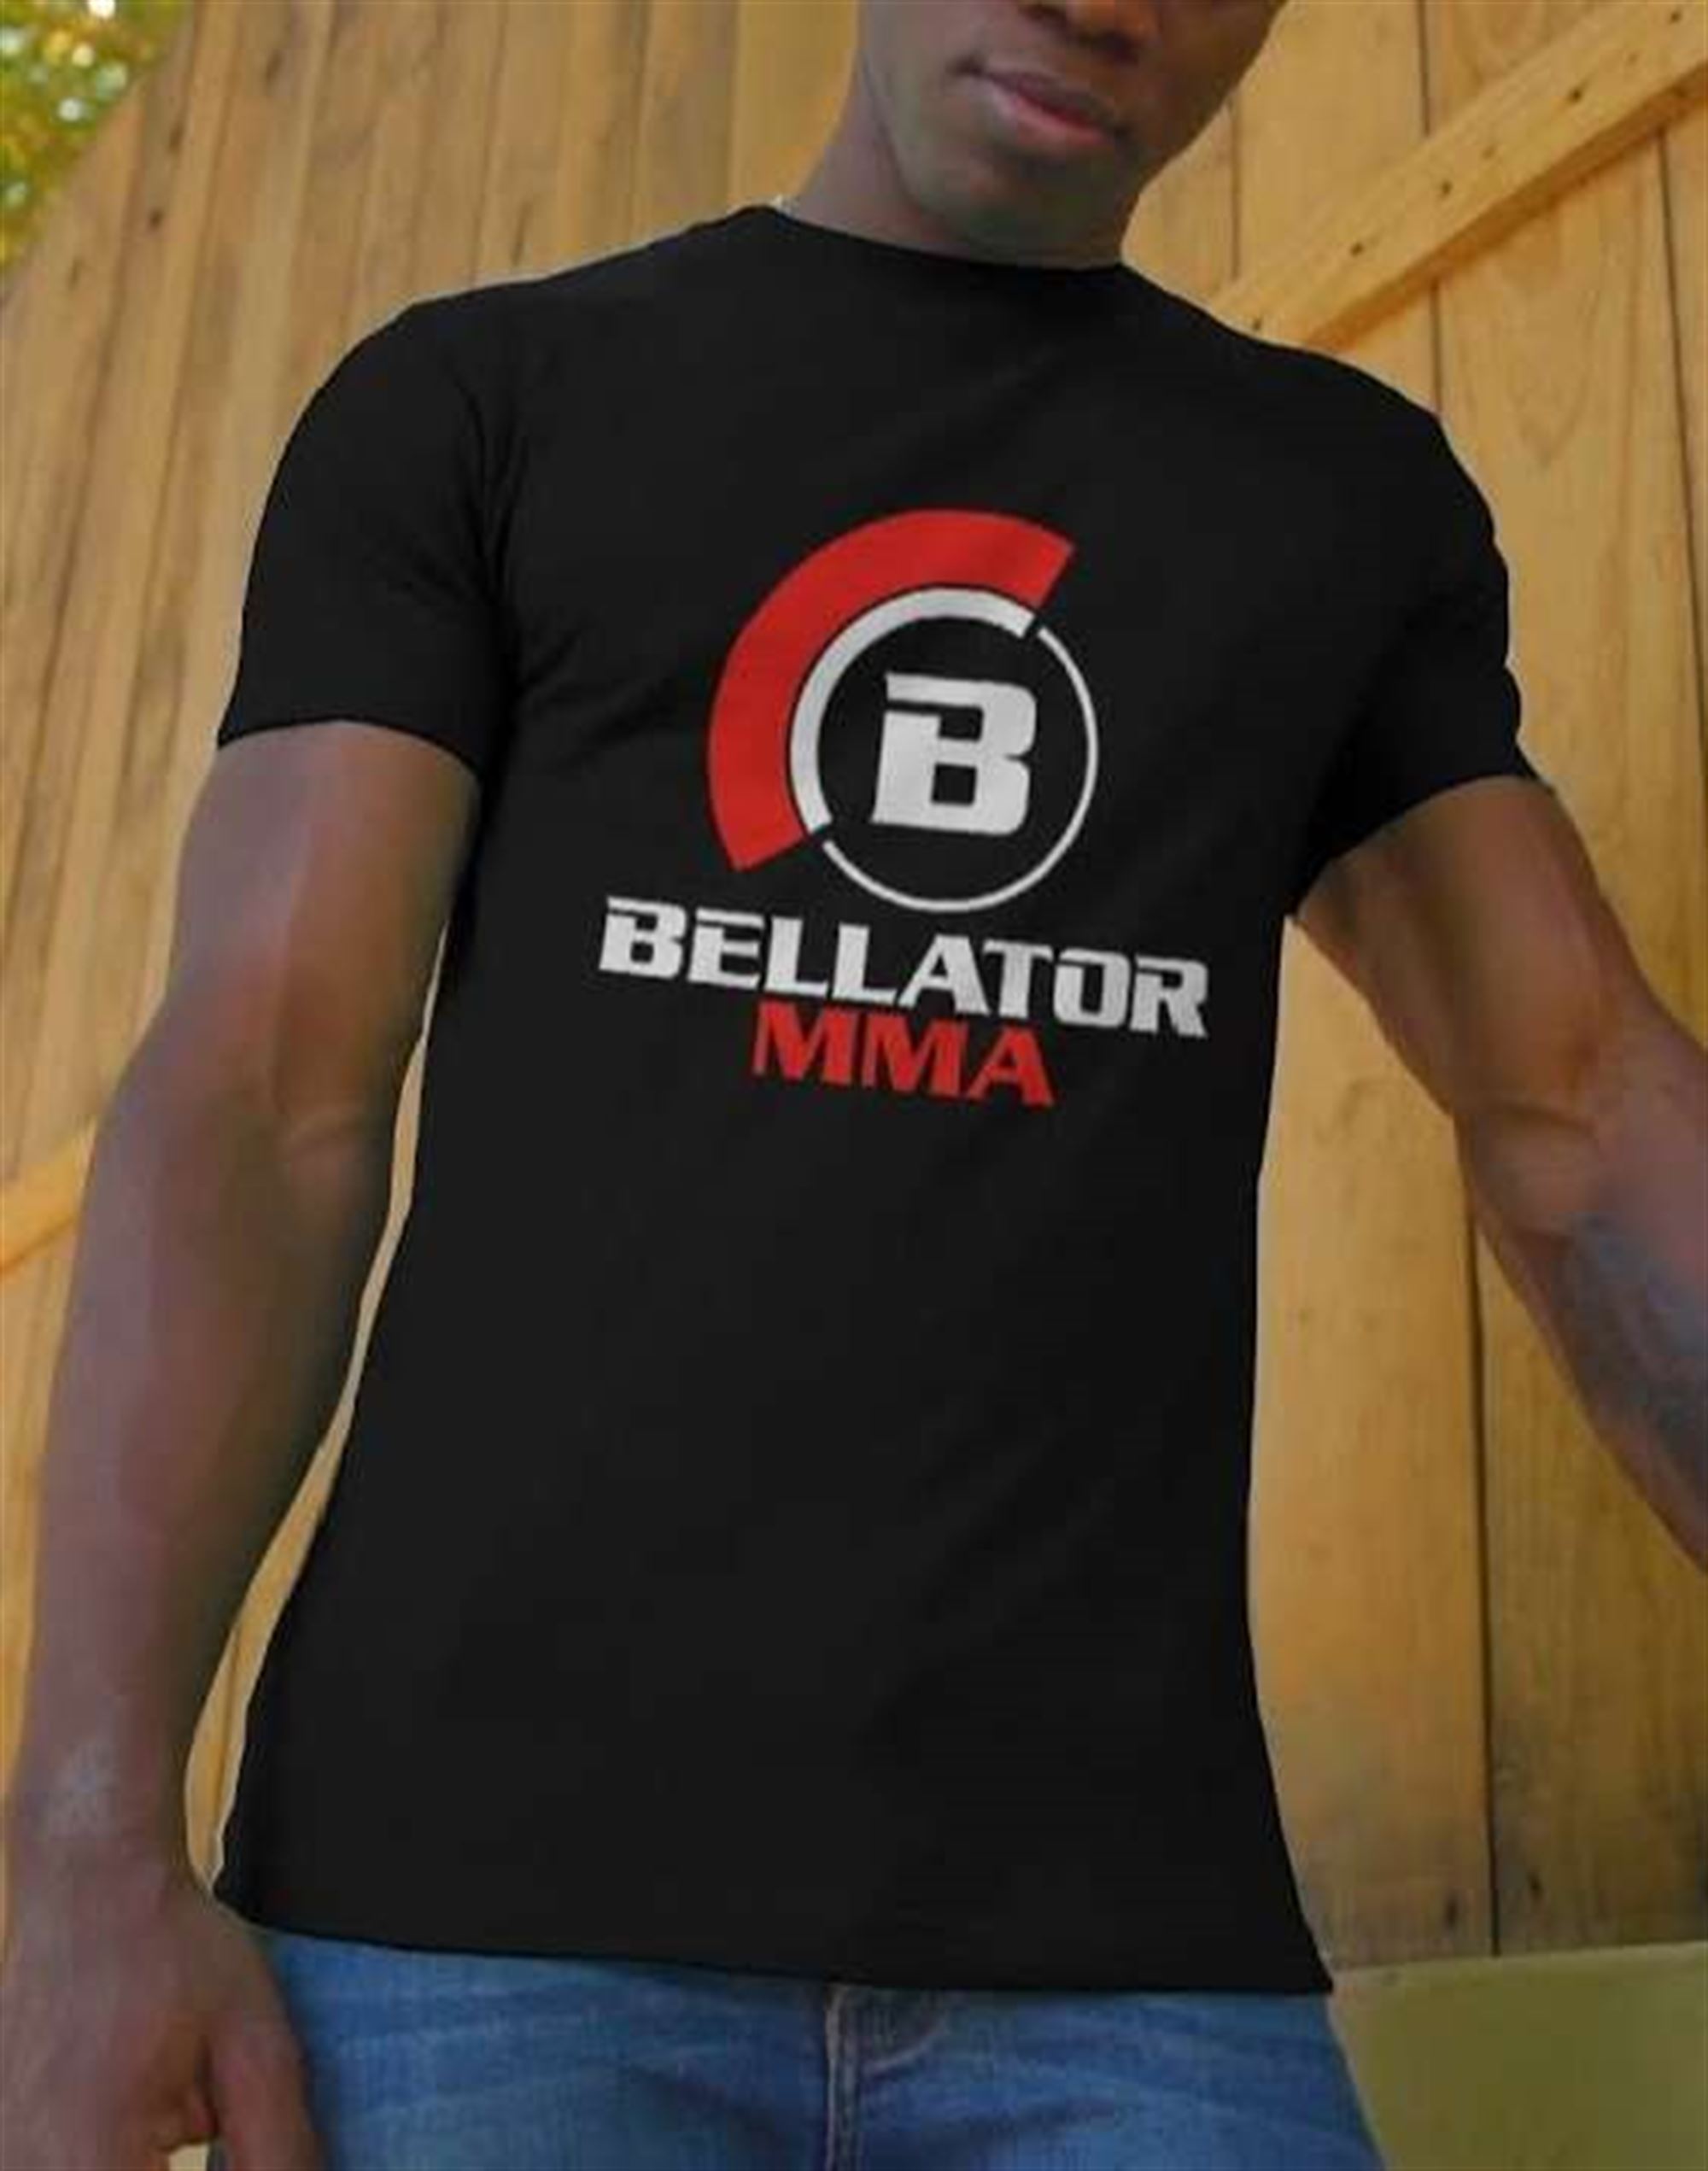 Bellator Mma T-shirt Size Up To 5xl